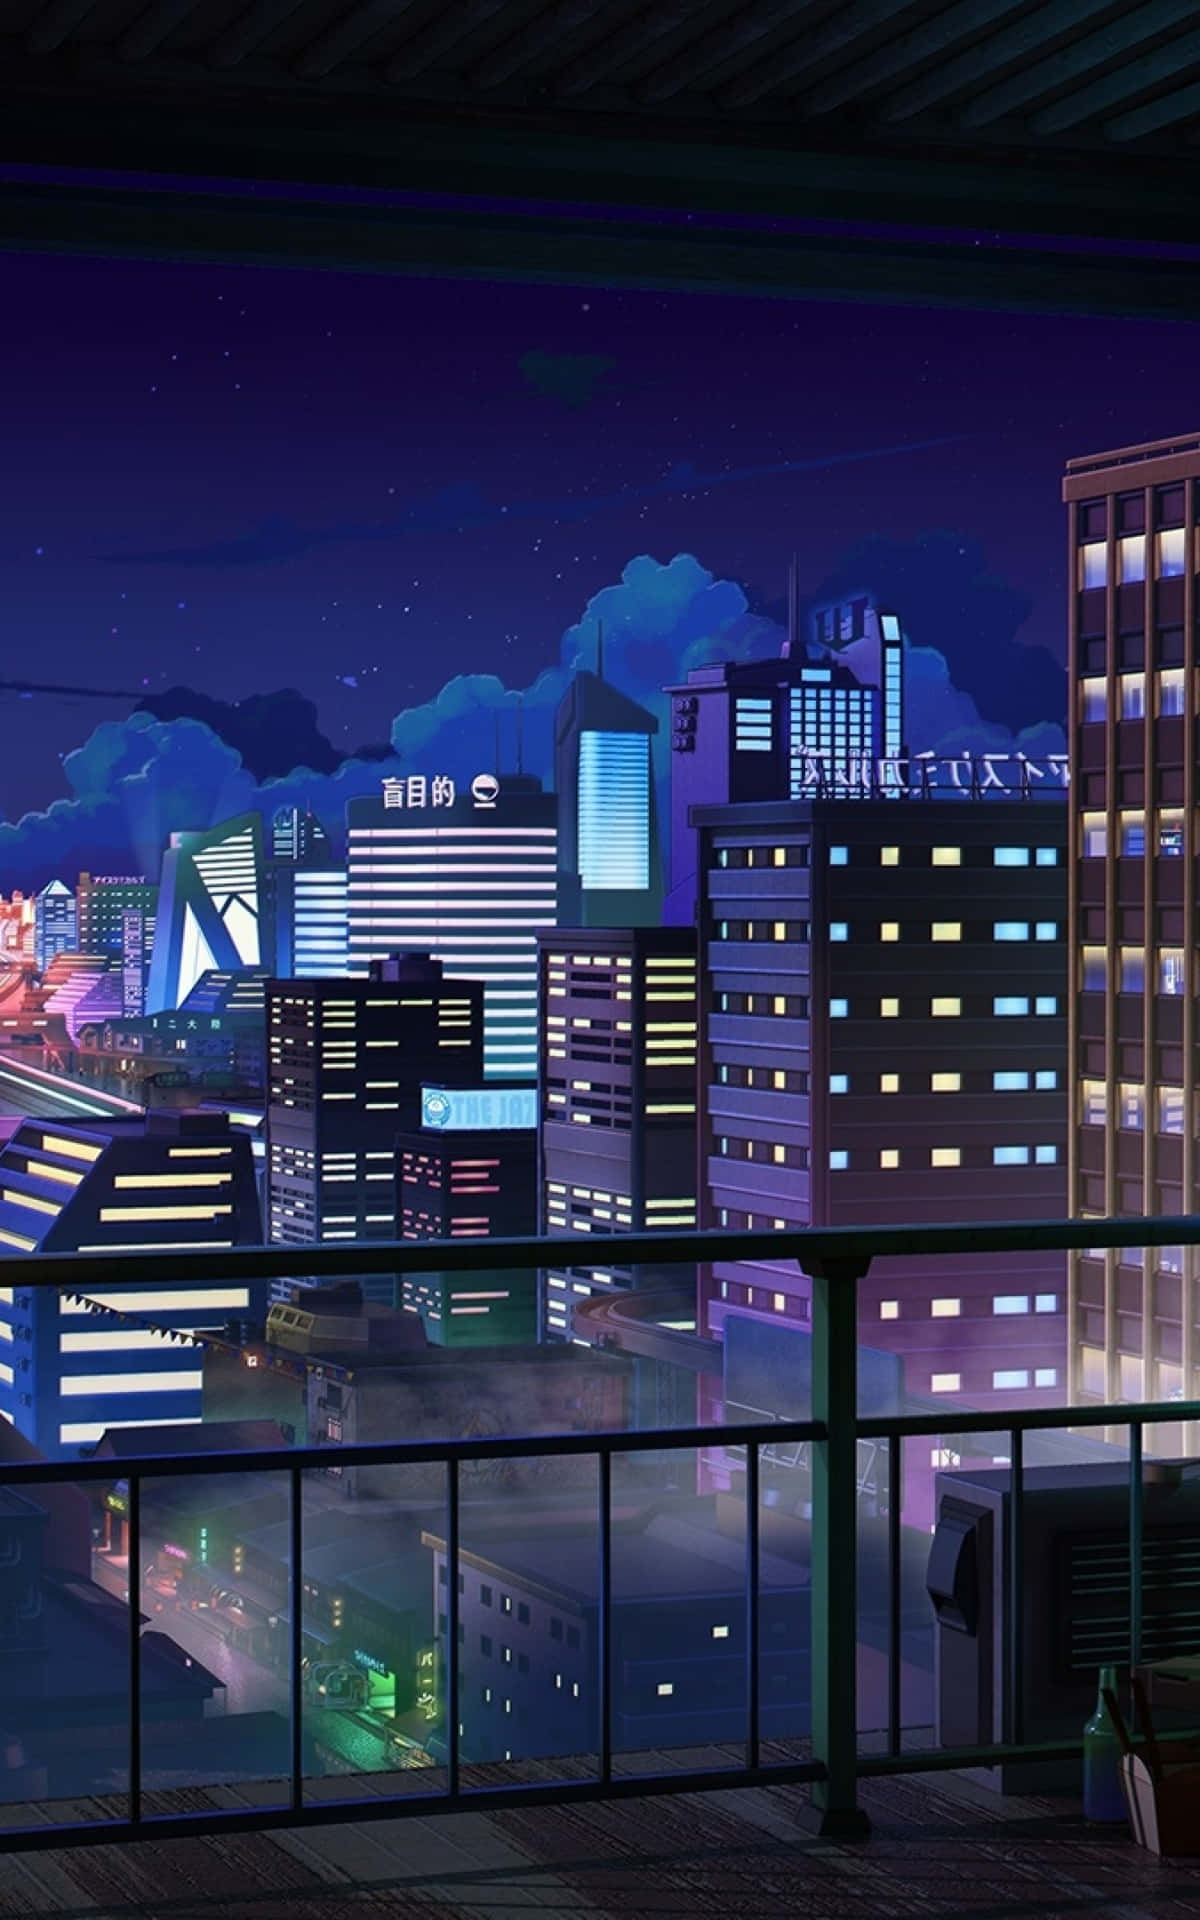 Modern Skyscraper In Anime Style. High Quality Illustration Stock Photo,  Picture and Royalty Free Image. Image 204414324.